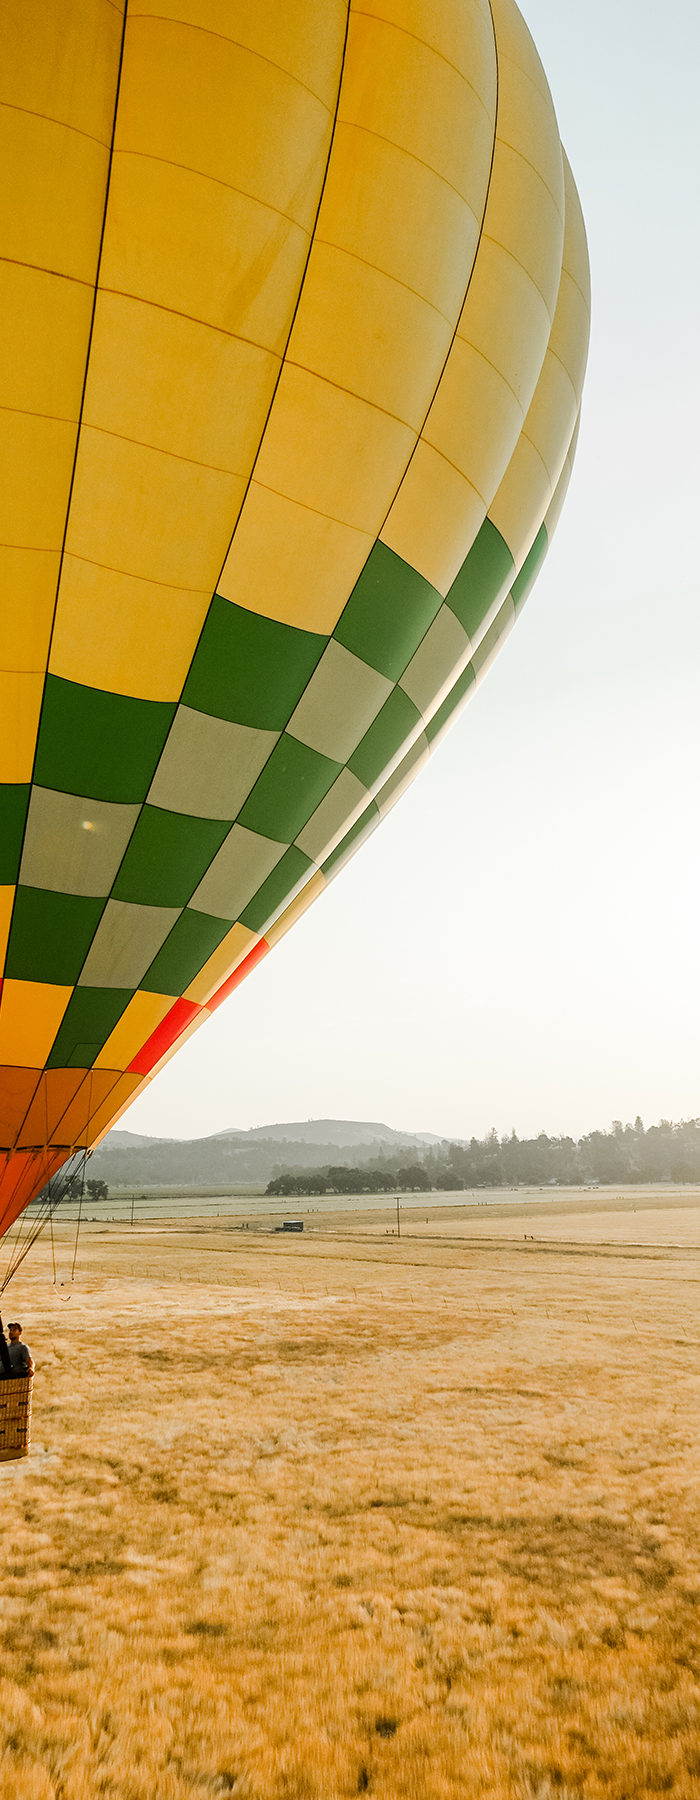 Torrance Coombs and Alyssa Campanella of The A List blog visits Calistoga Balloons with Visit Napa Valley